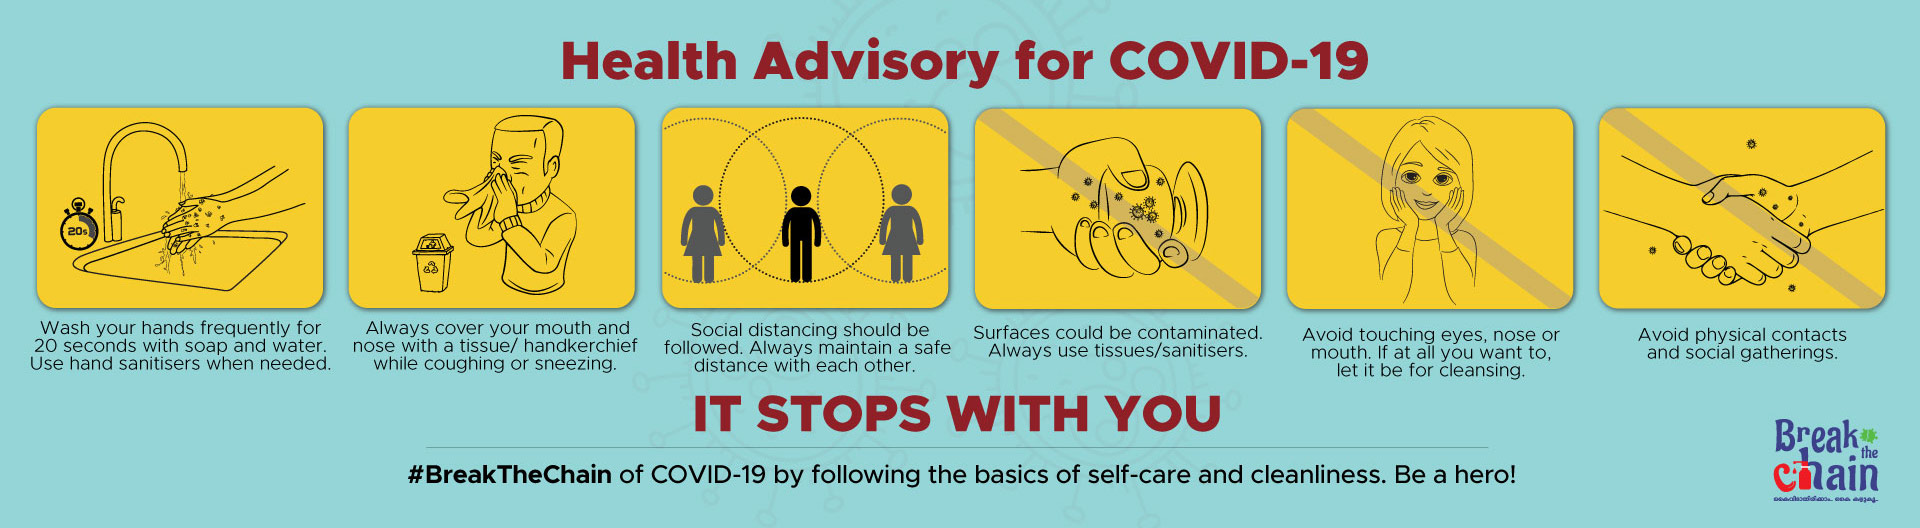 Guidance to follow before, during & after your drive to travel safely in the context of COVID-19